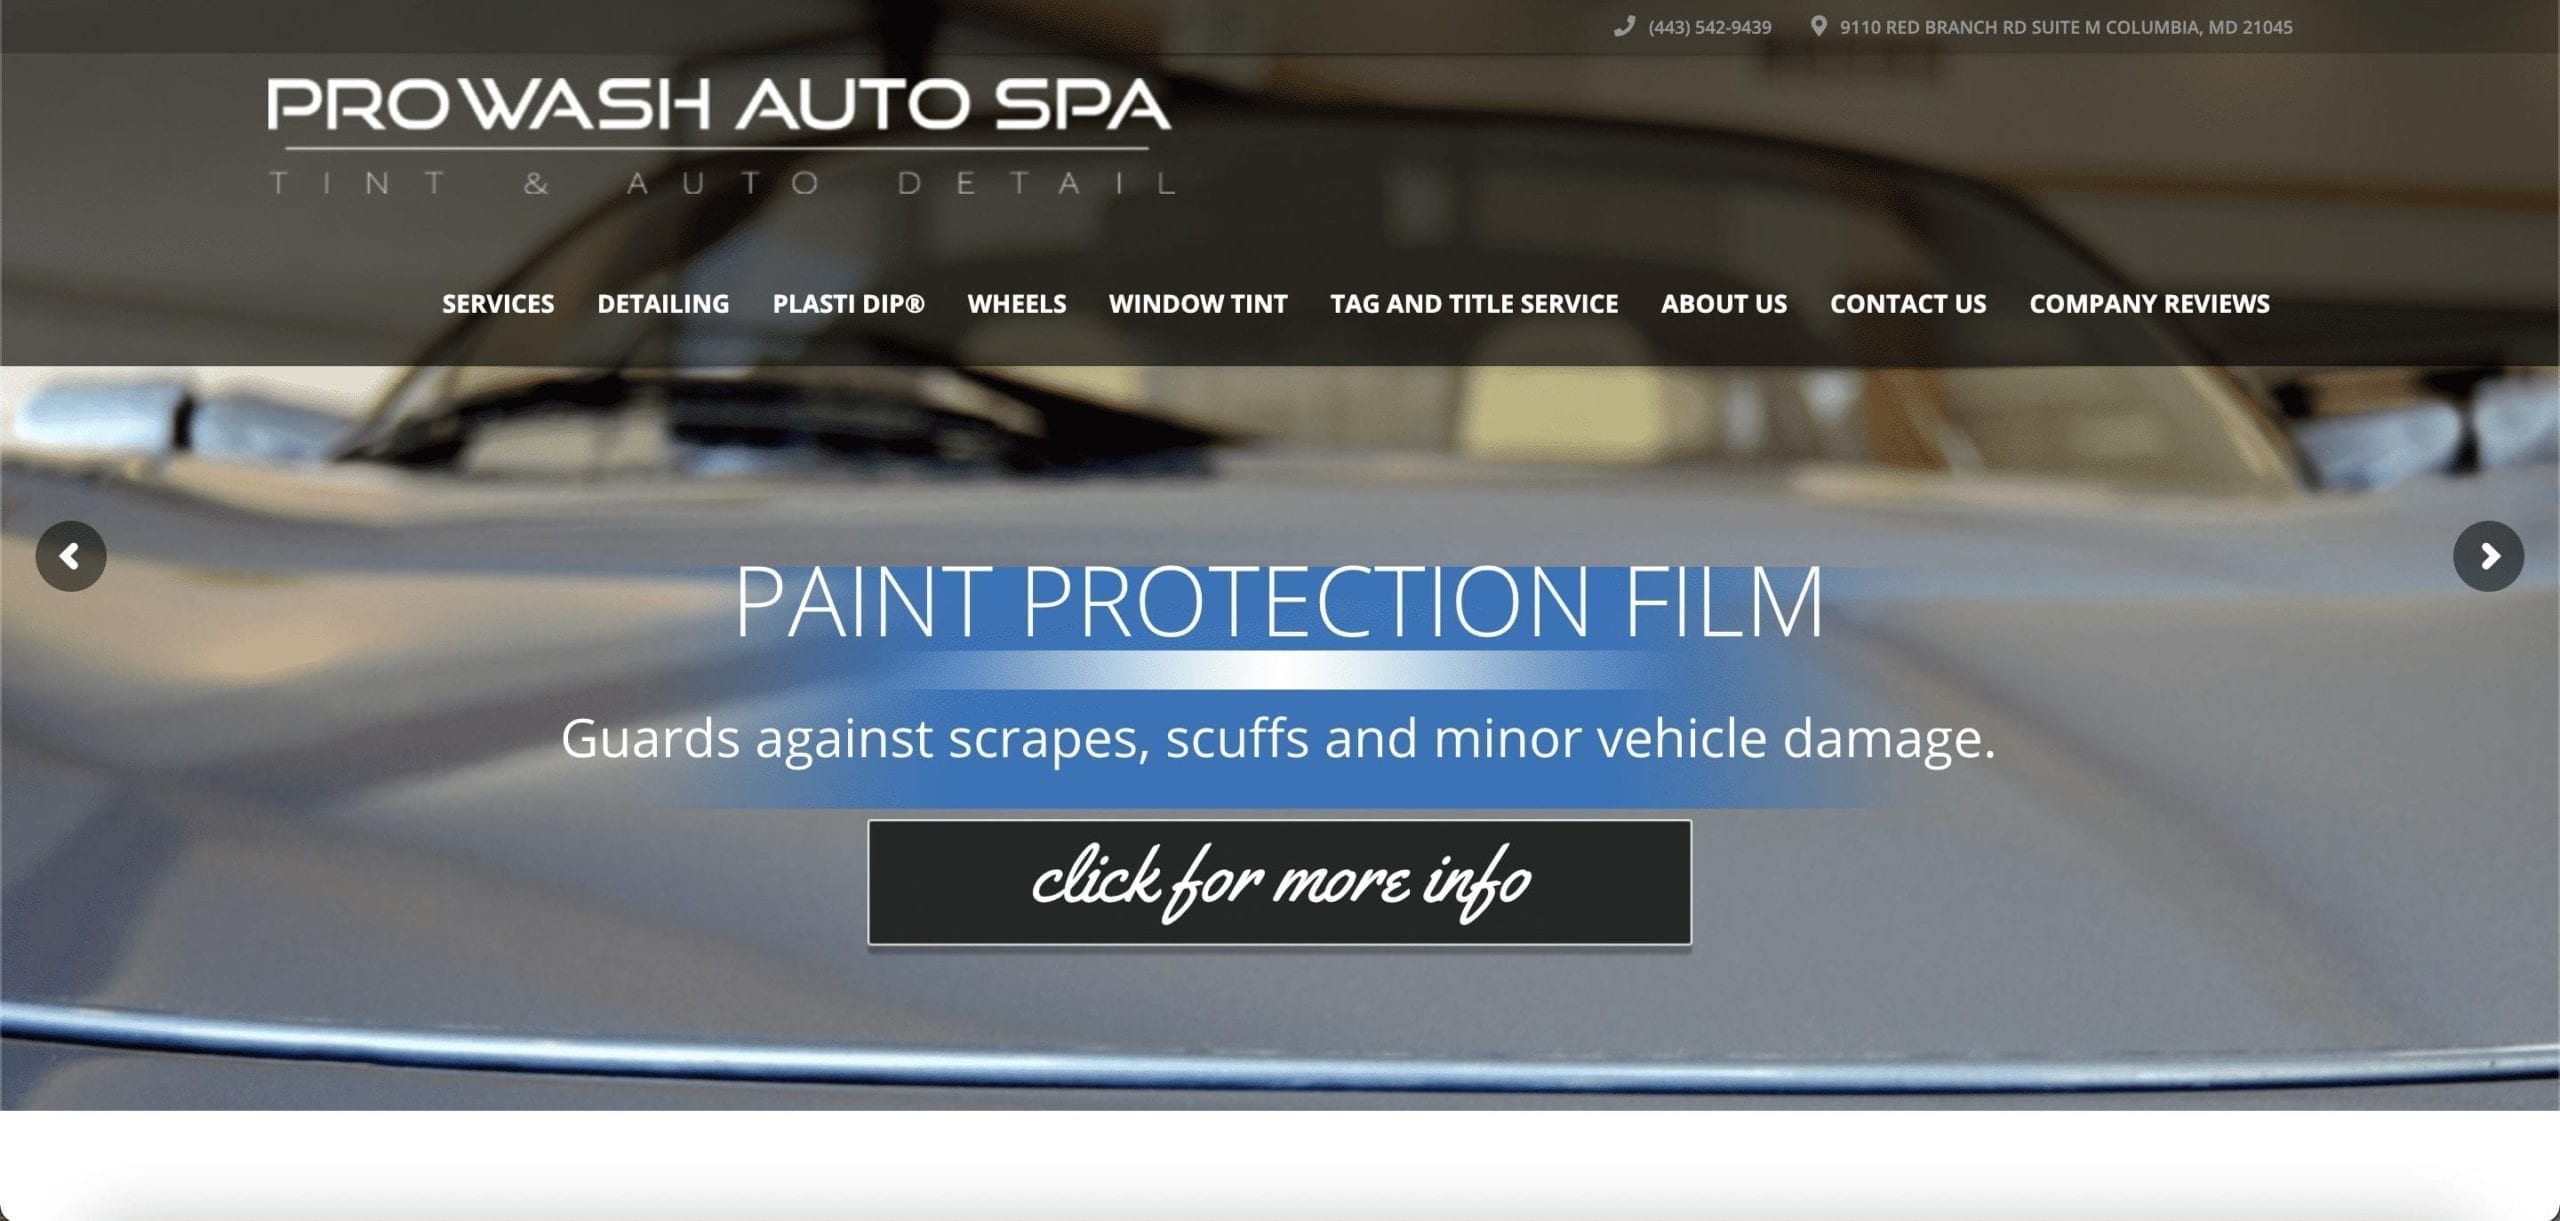 Pro Wash Auto Spa  Tint and Auto Detail